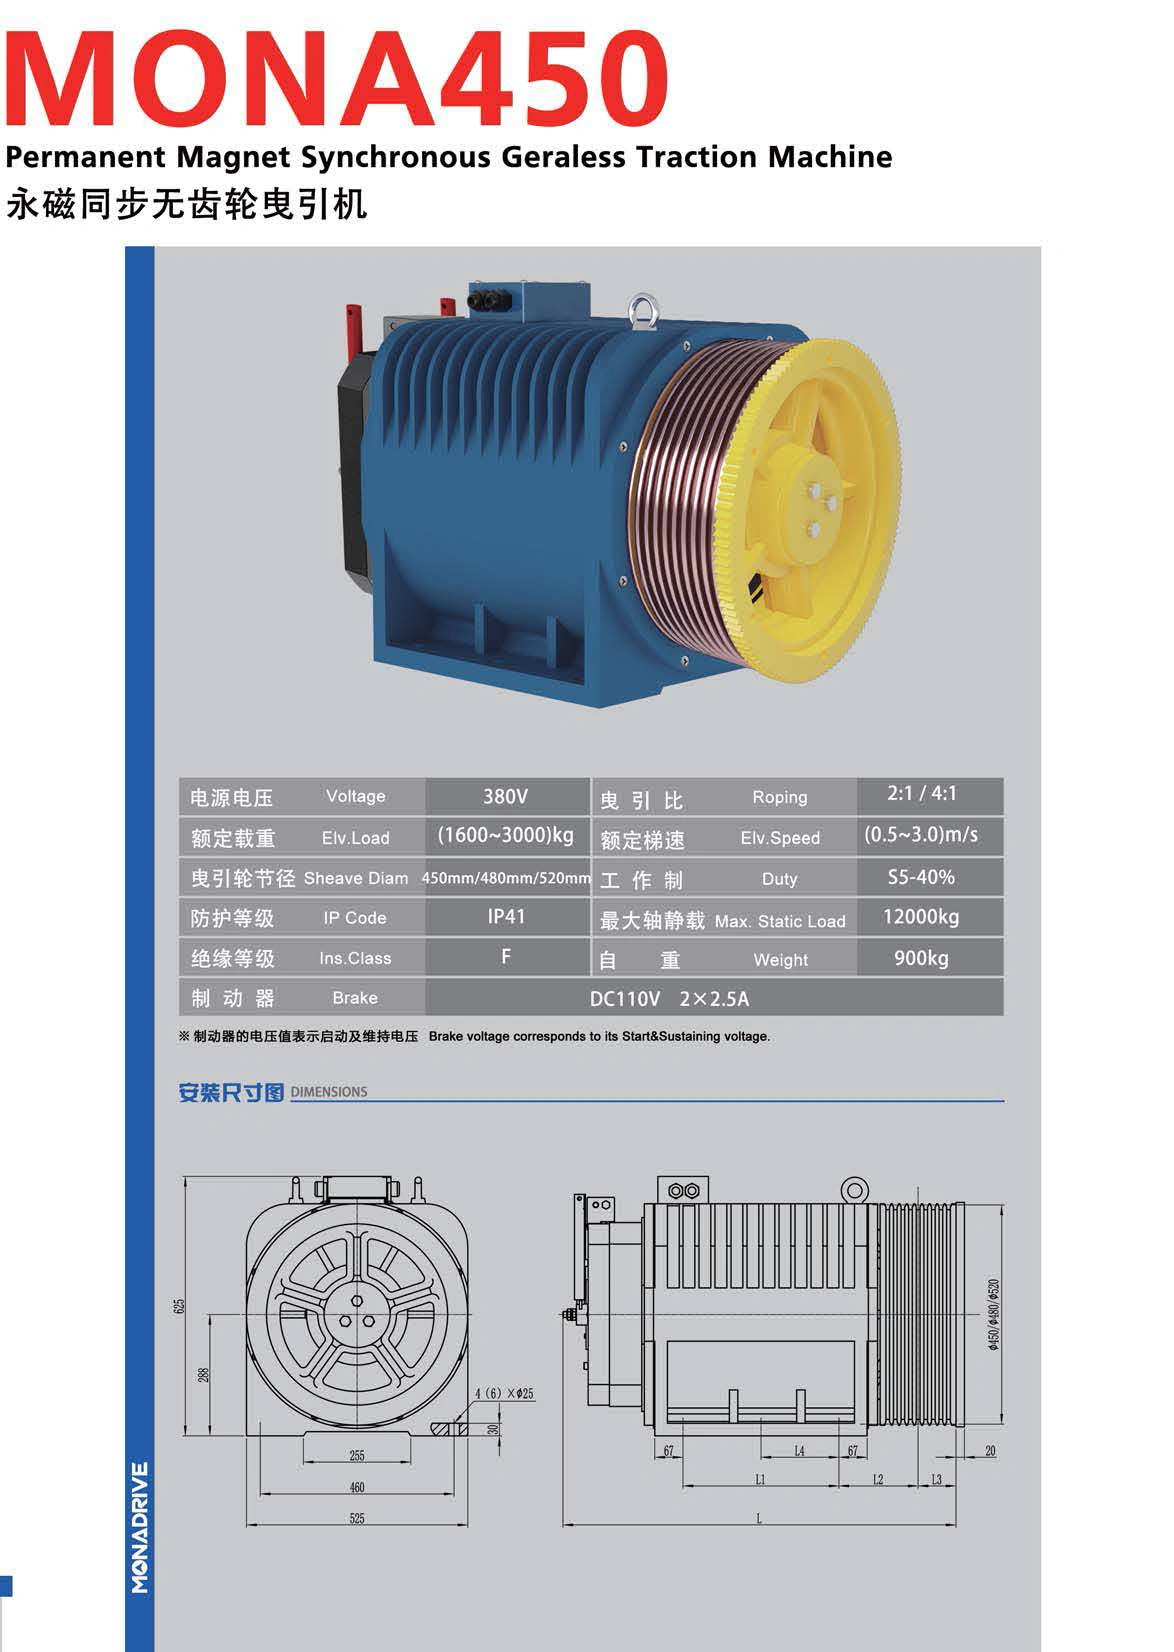 TRACTION MACHINE MONA450 SPECIFICATION